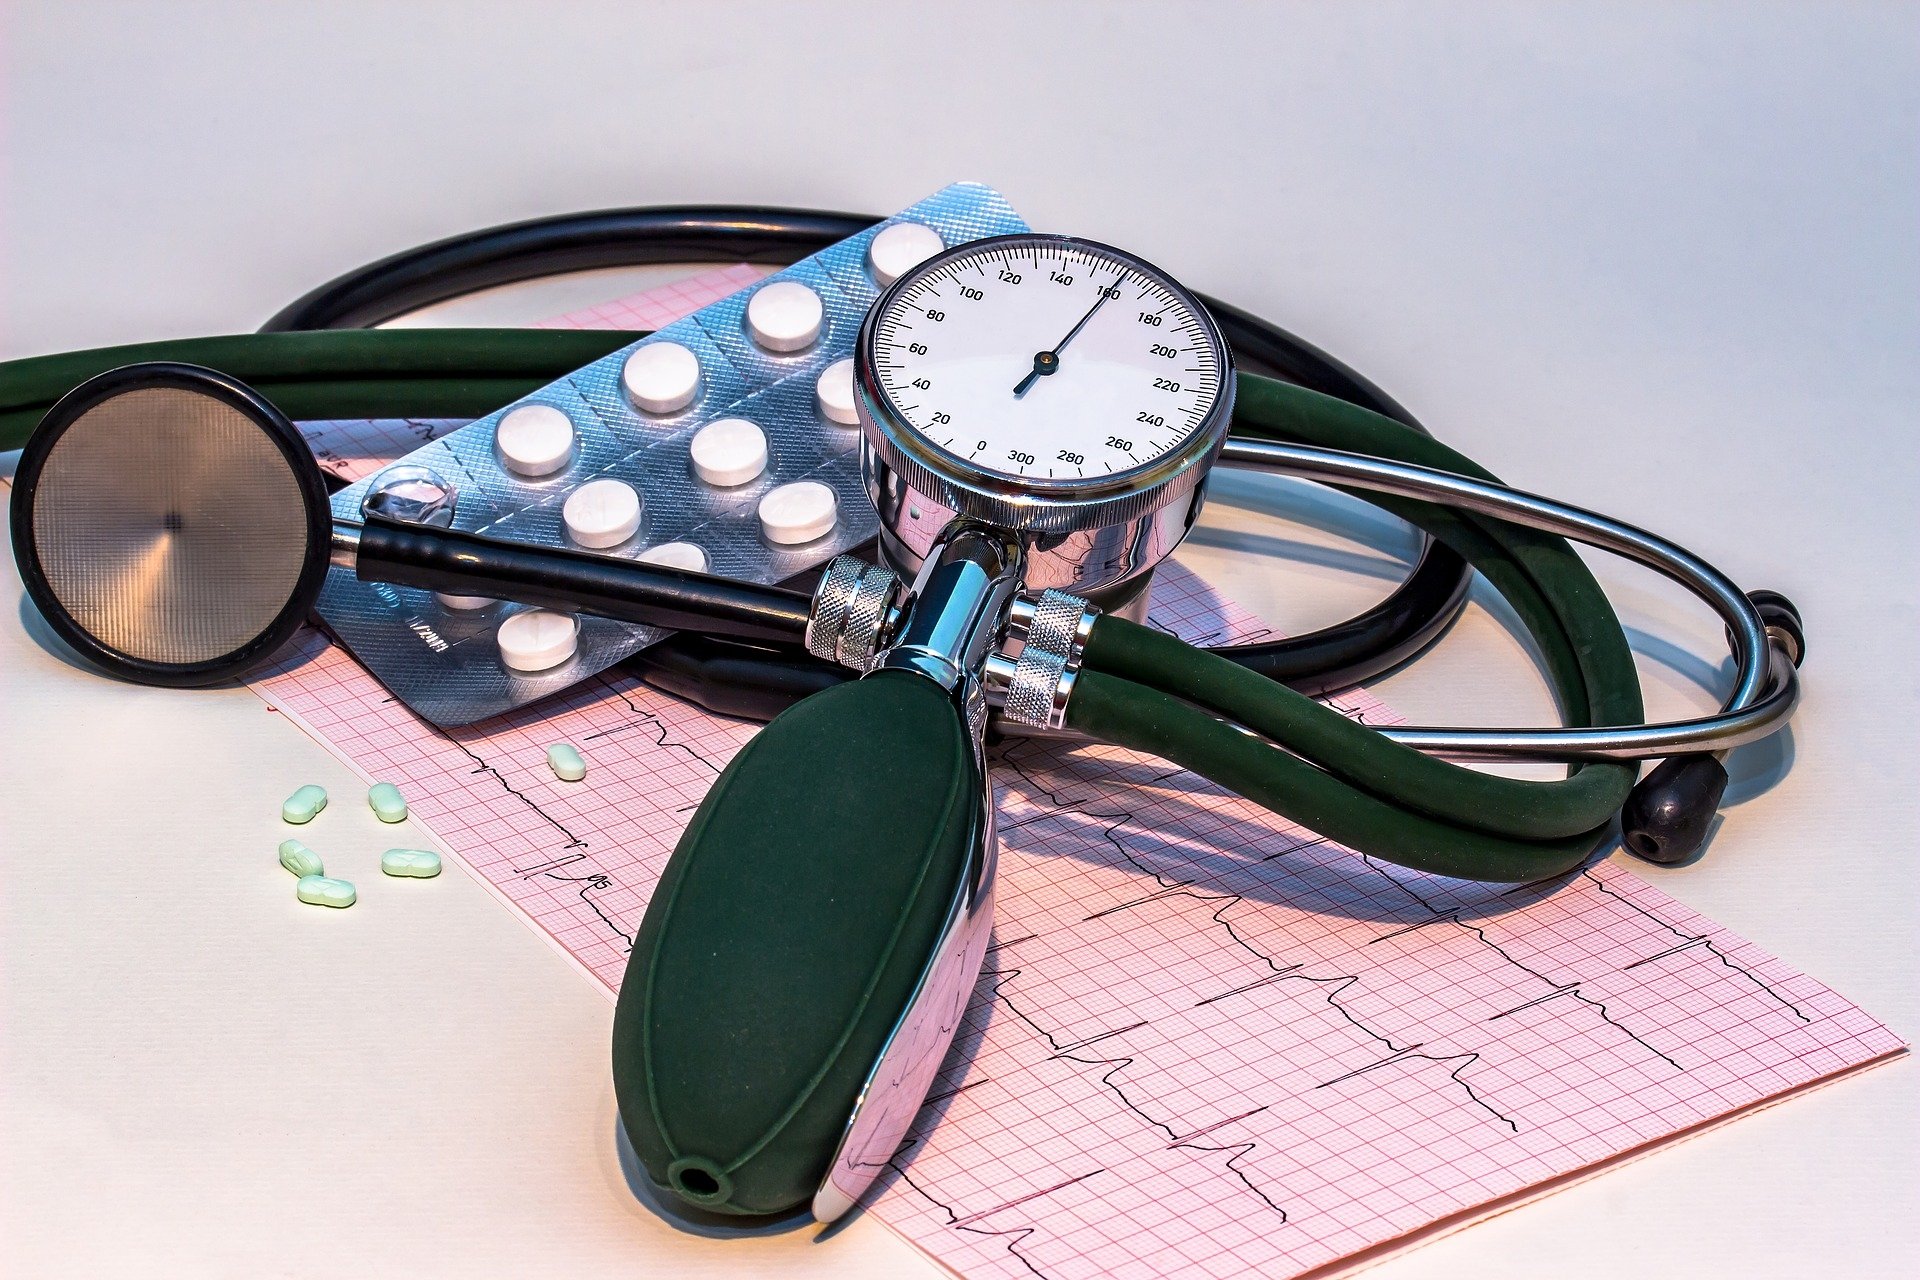 Blood pressure monitor and Stethoscope